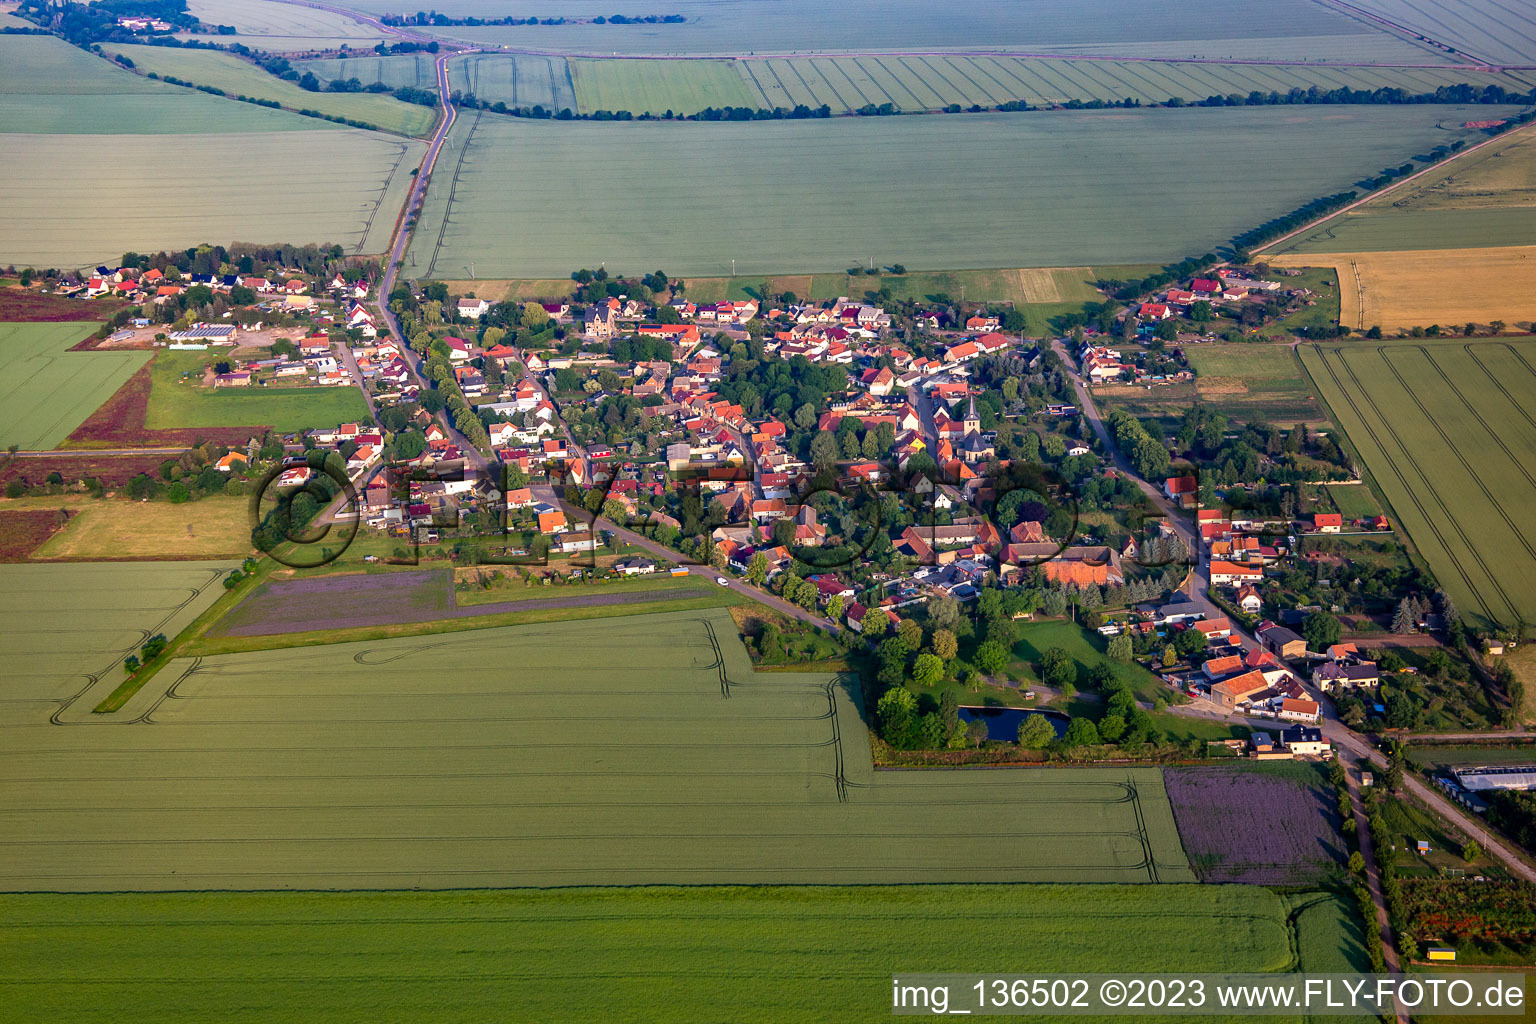 From the east in the district Radisleben in Ballenstedt in the state Saxony-Anhalt, Germany